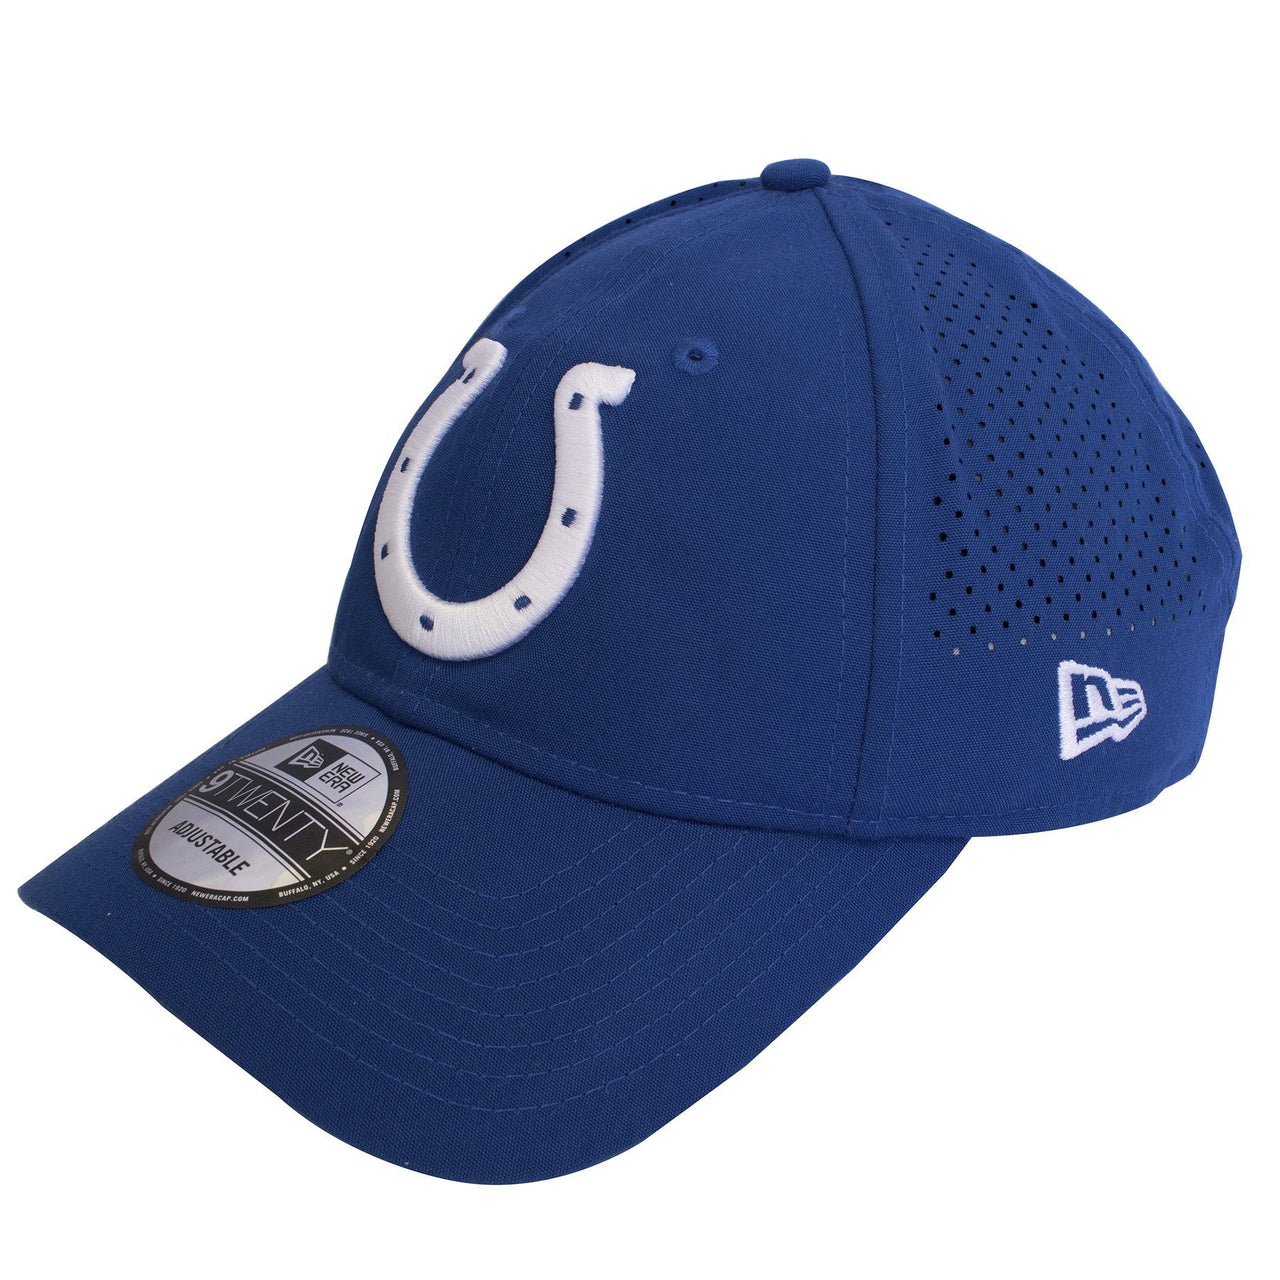 Left side of this Indianapolis Colts dad hat is the New Era logo threaded in white.